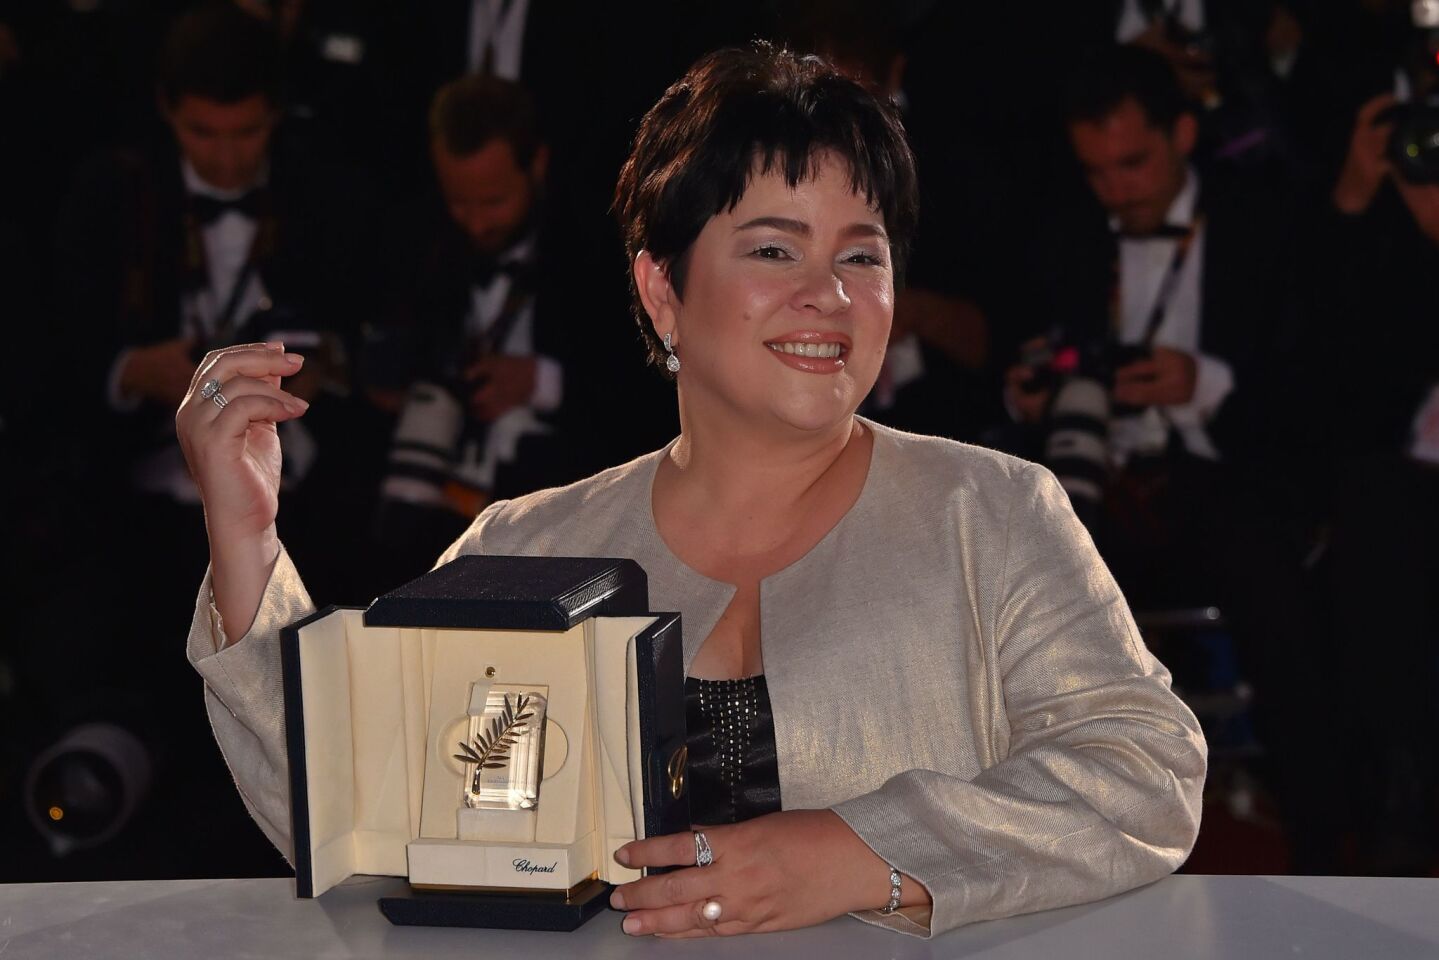 Filipina actress Jaclyn Jose with her Best Actress prize during a photo call at 69th Cannes Film Festival.